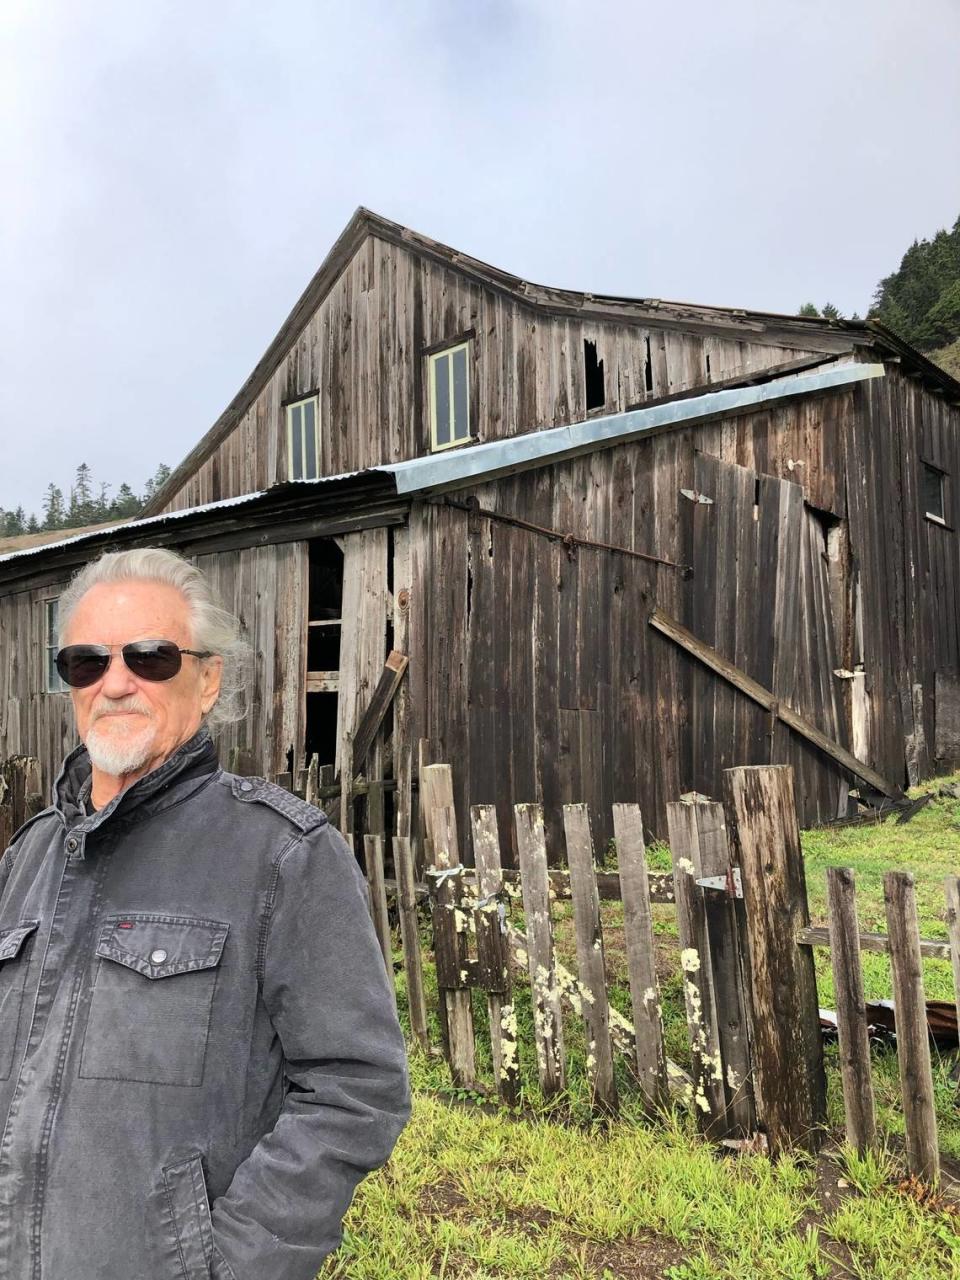 Singer, songwriter and actor Kris Kristofferson on the ranch.